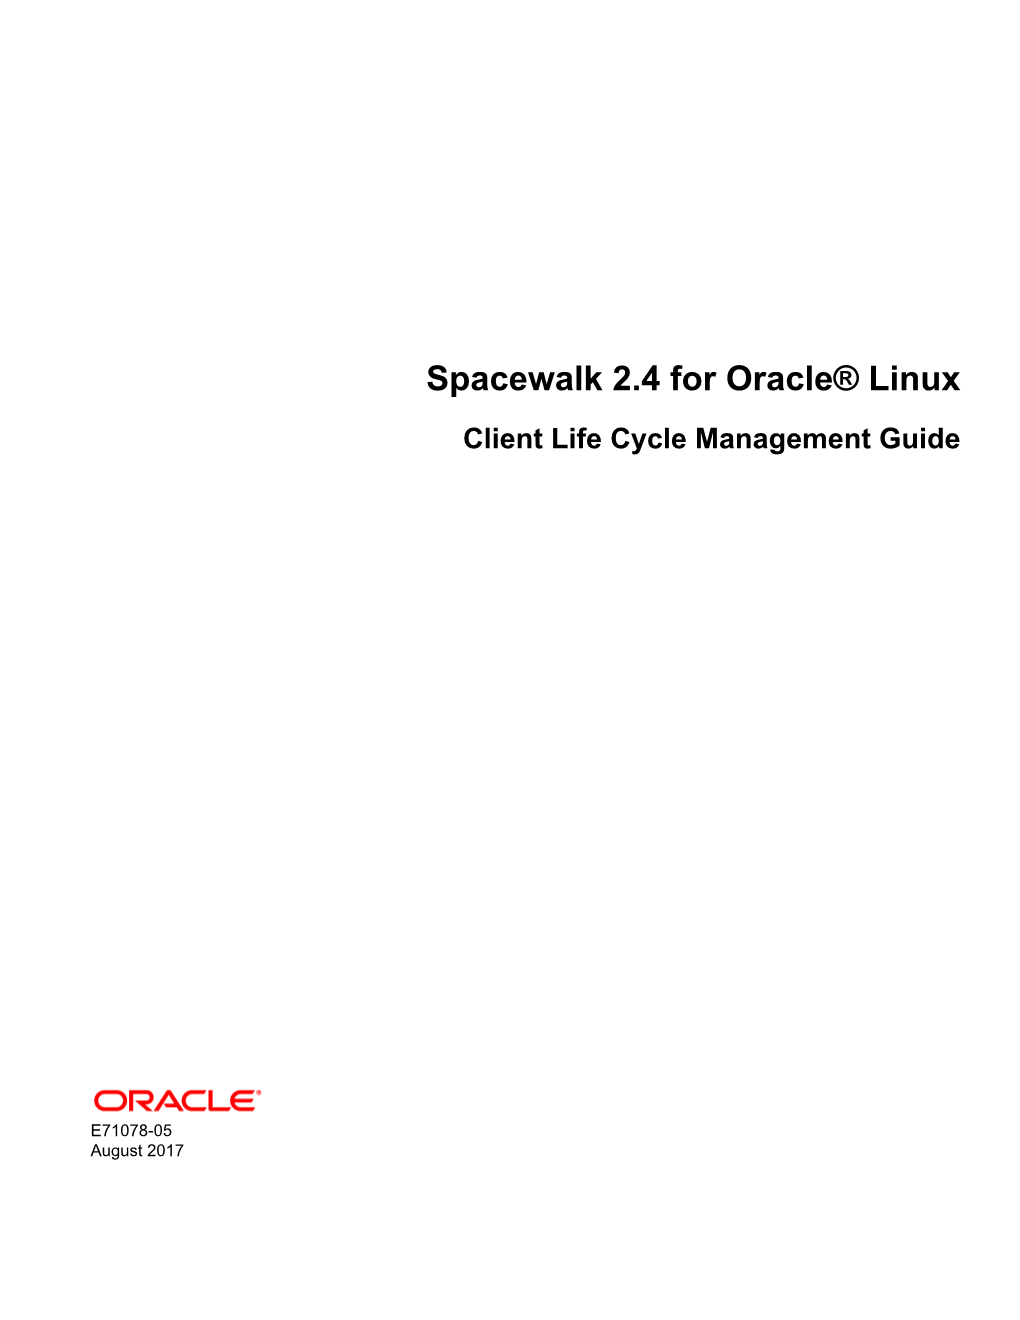 Spacewalk 2.4 for Oracle® Linux Client Life Cycle Management Guide